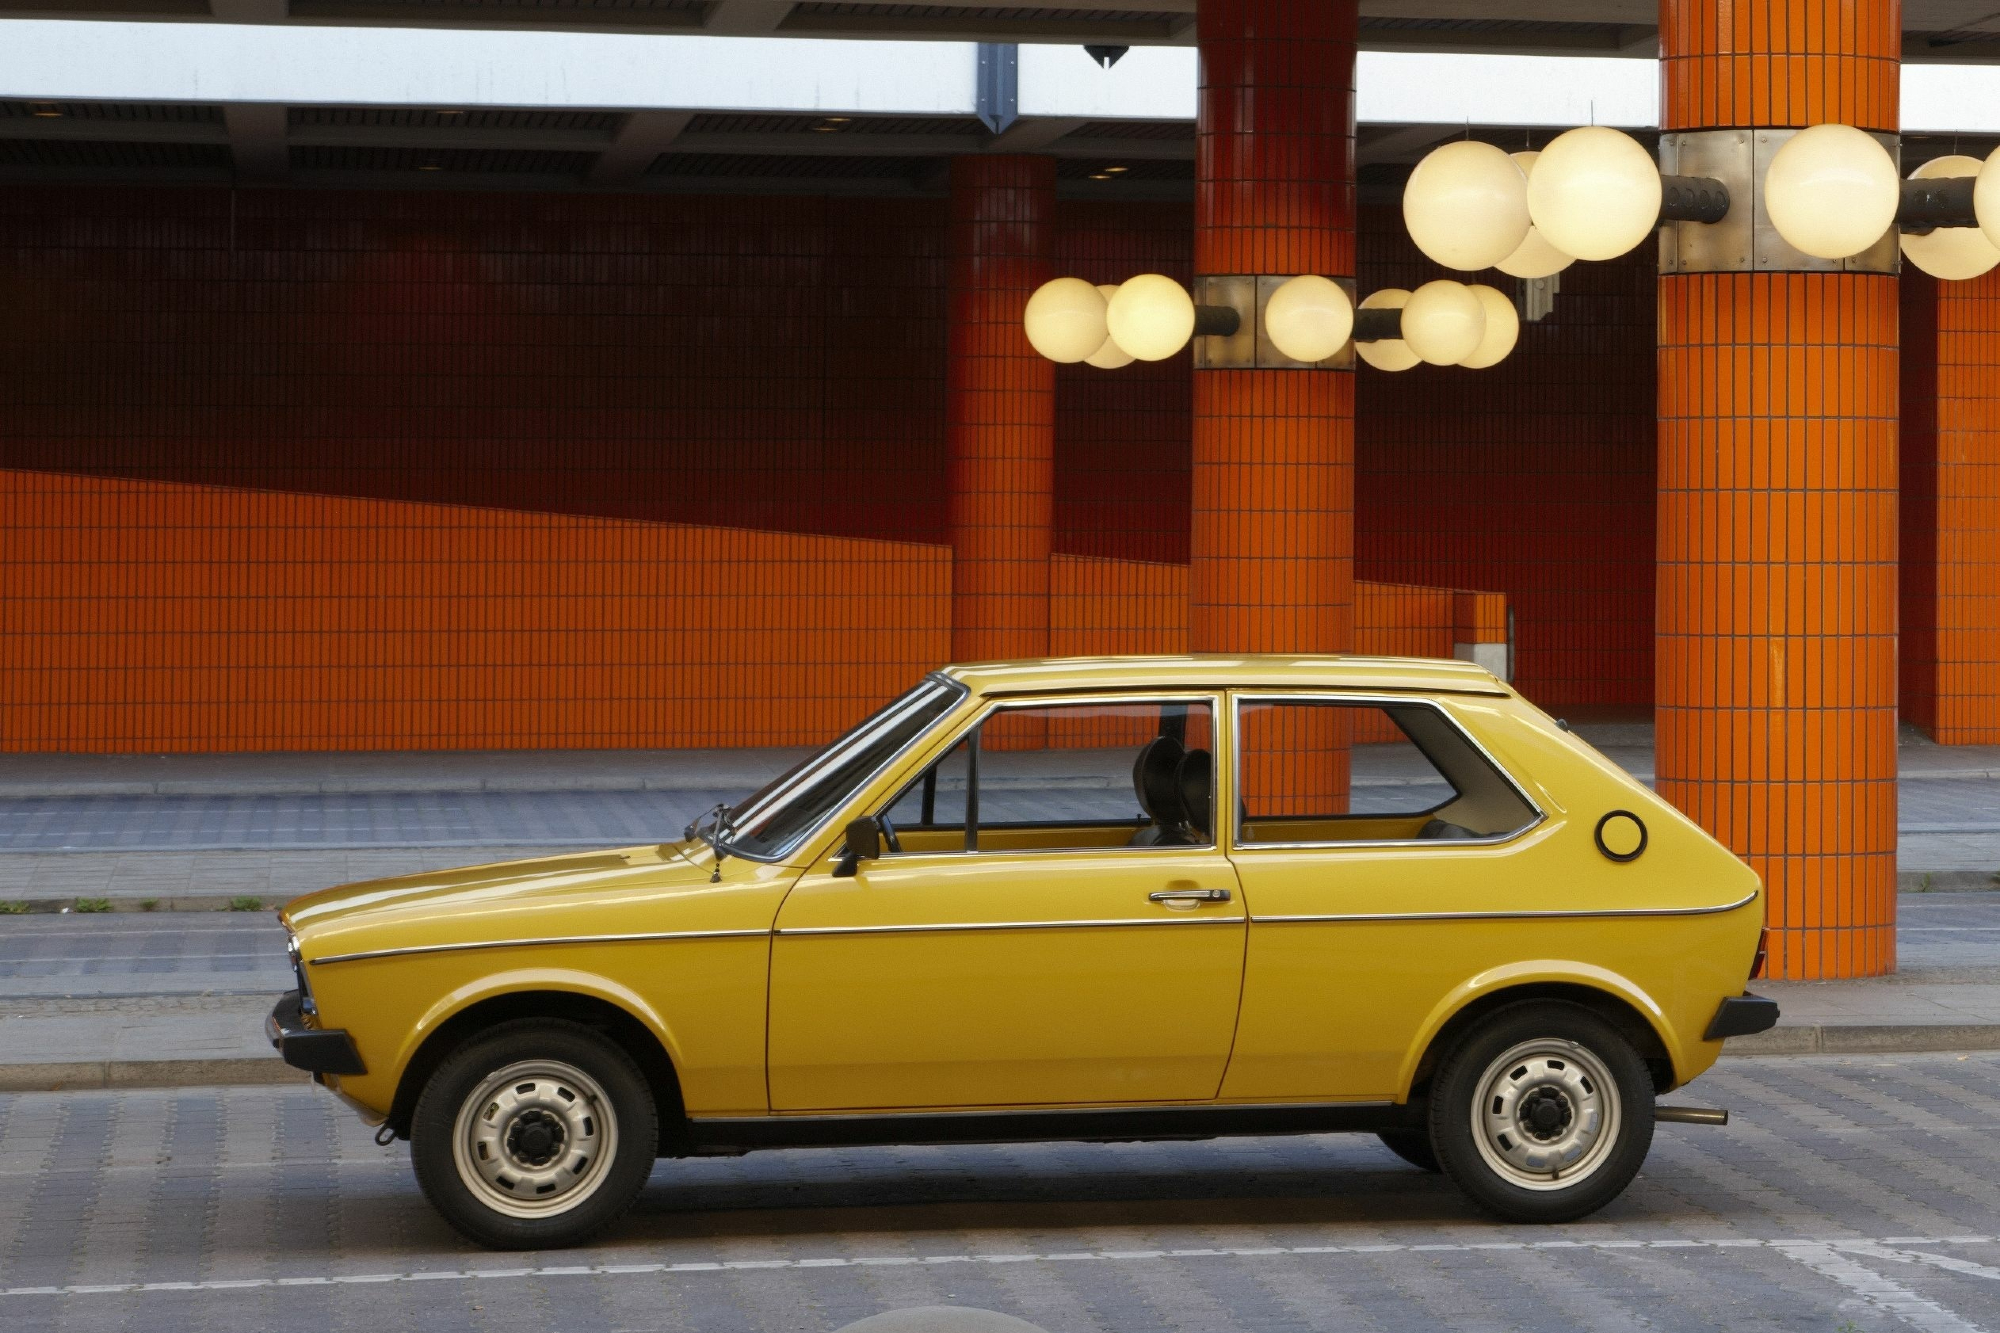 A yellow Audi 50 pared on the side of a roadway with a large red concrete building in the background.